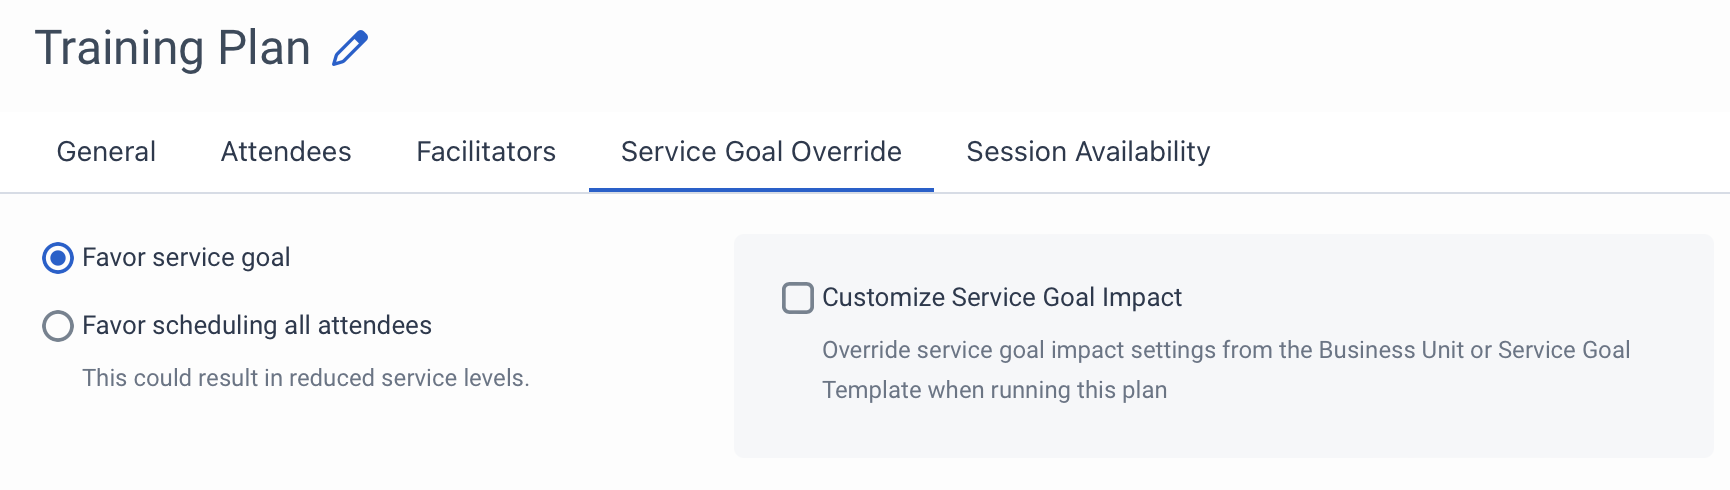 Displays the service goal override conditions that can be set for the activity plan